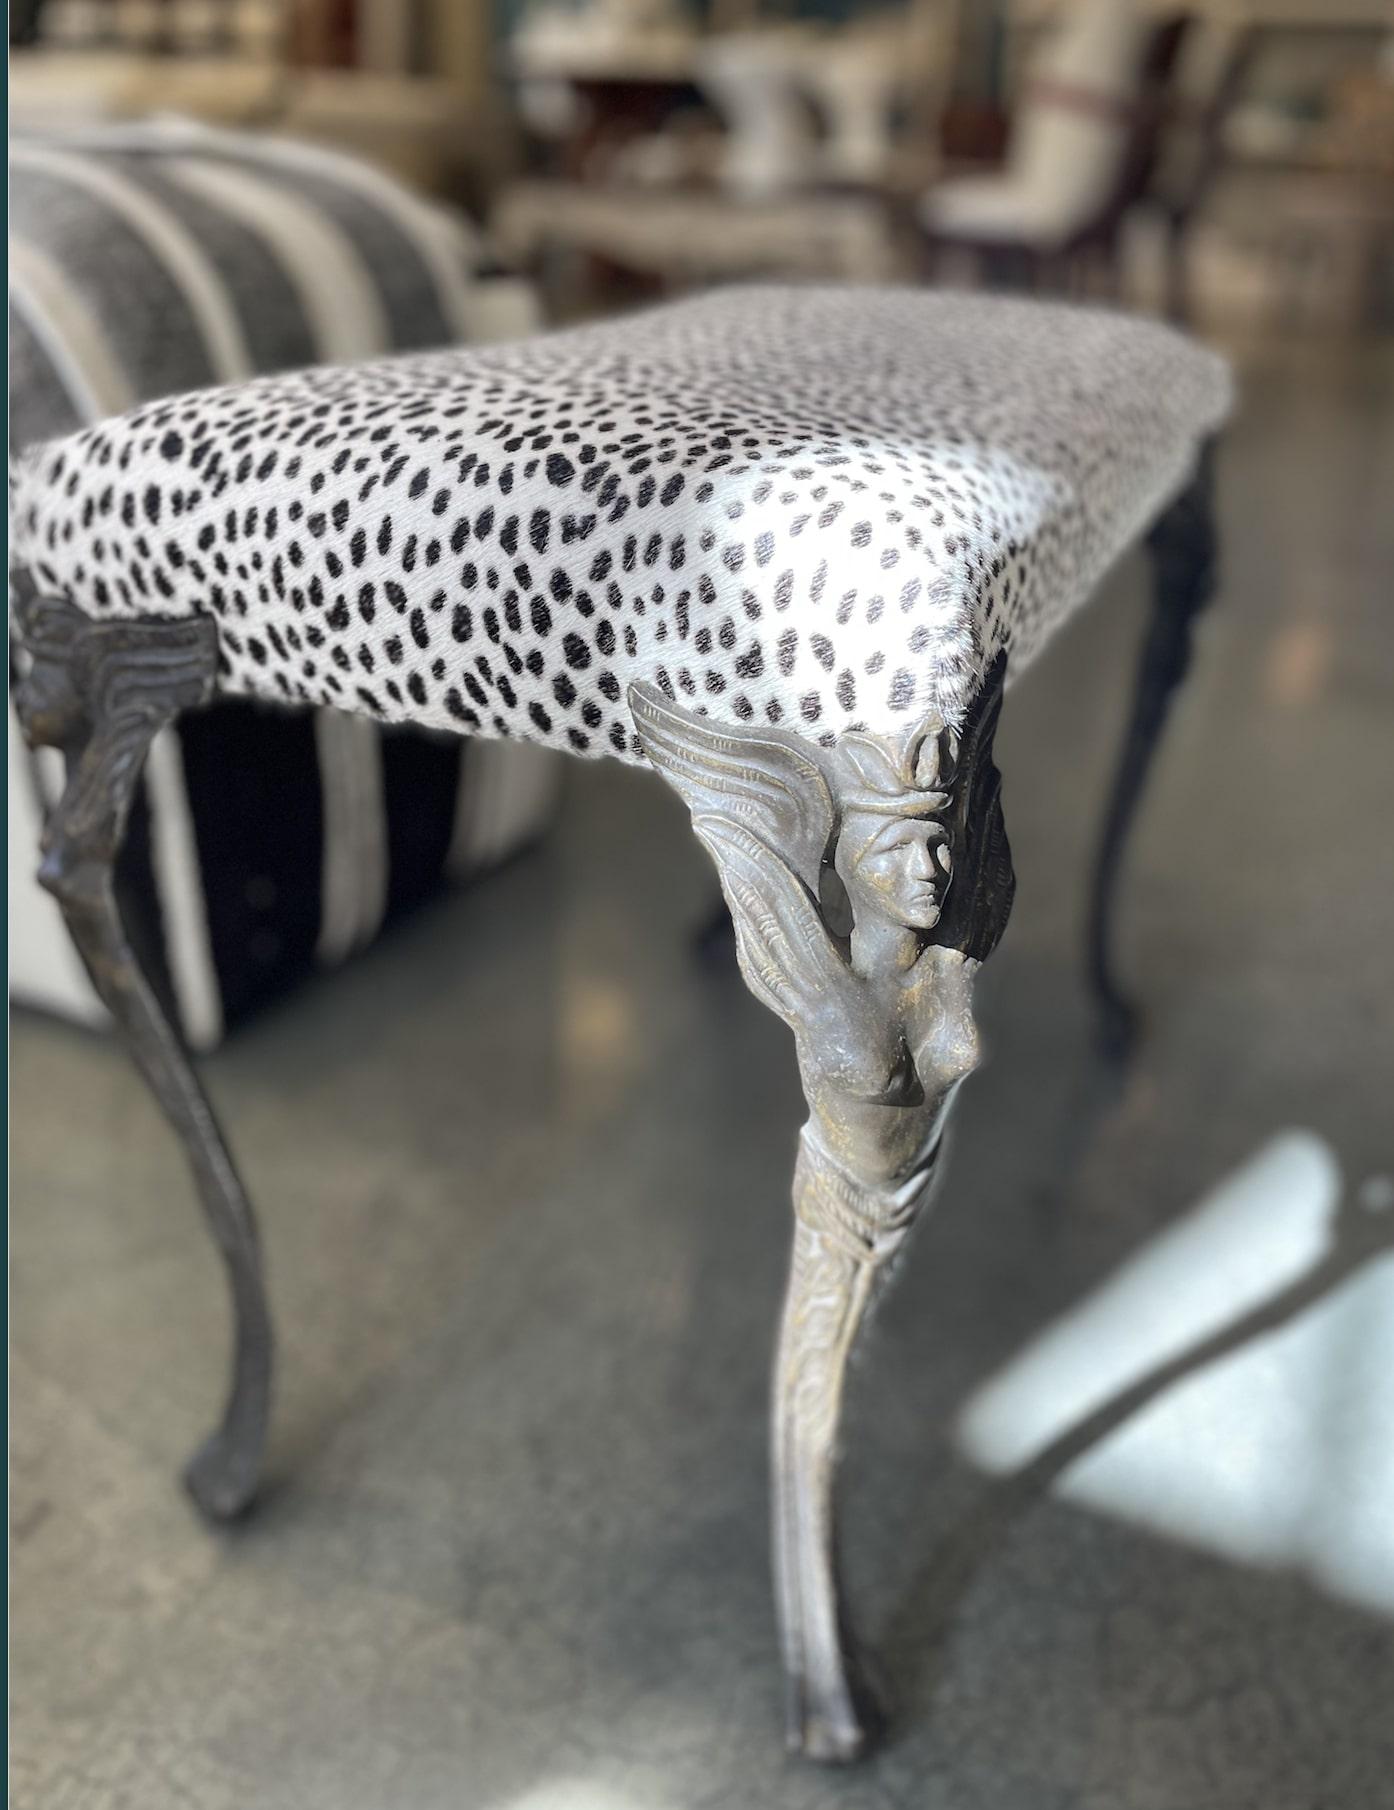 Antique Art Nouveau cast iron vanity bench with newly upholstered seat in a cool Cheetah printed hide. Legs are decorative cast iron winged female figures. What a a fun and sassy way accent to any bathroom or vanity table.

22